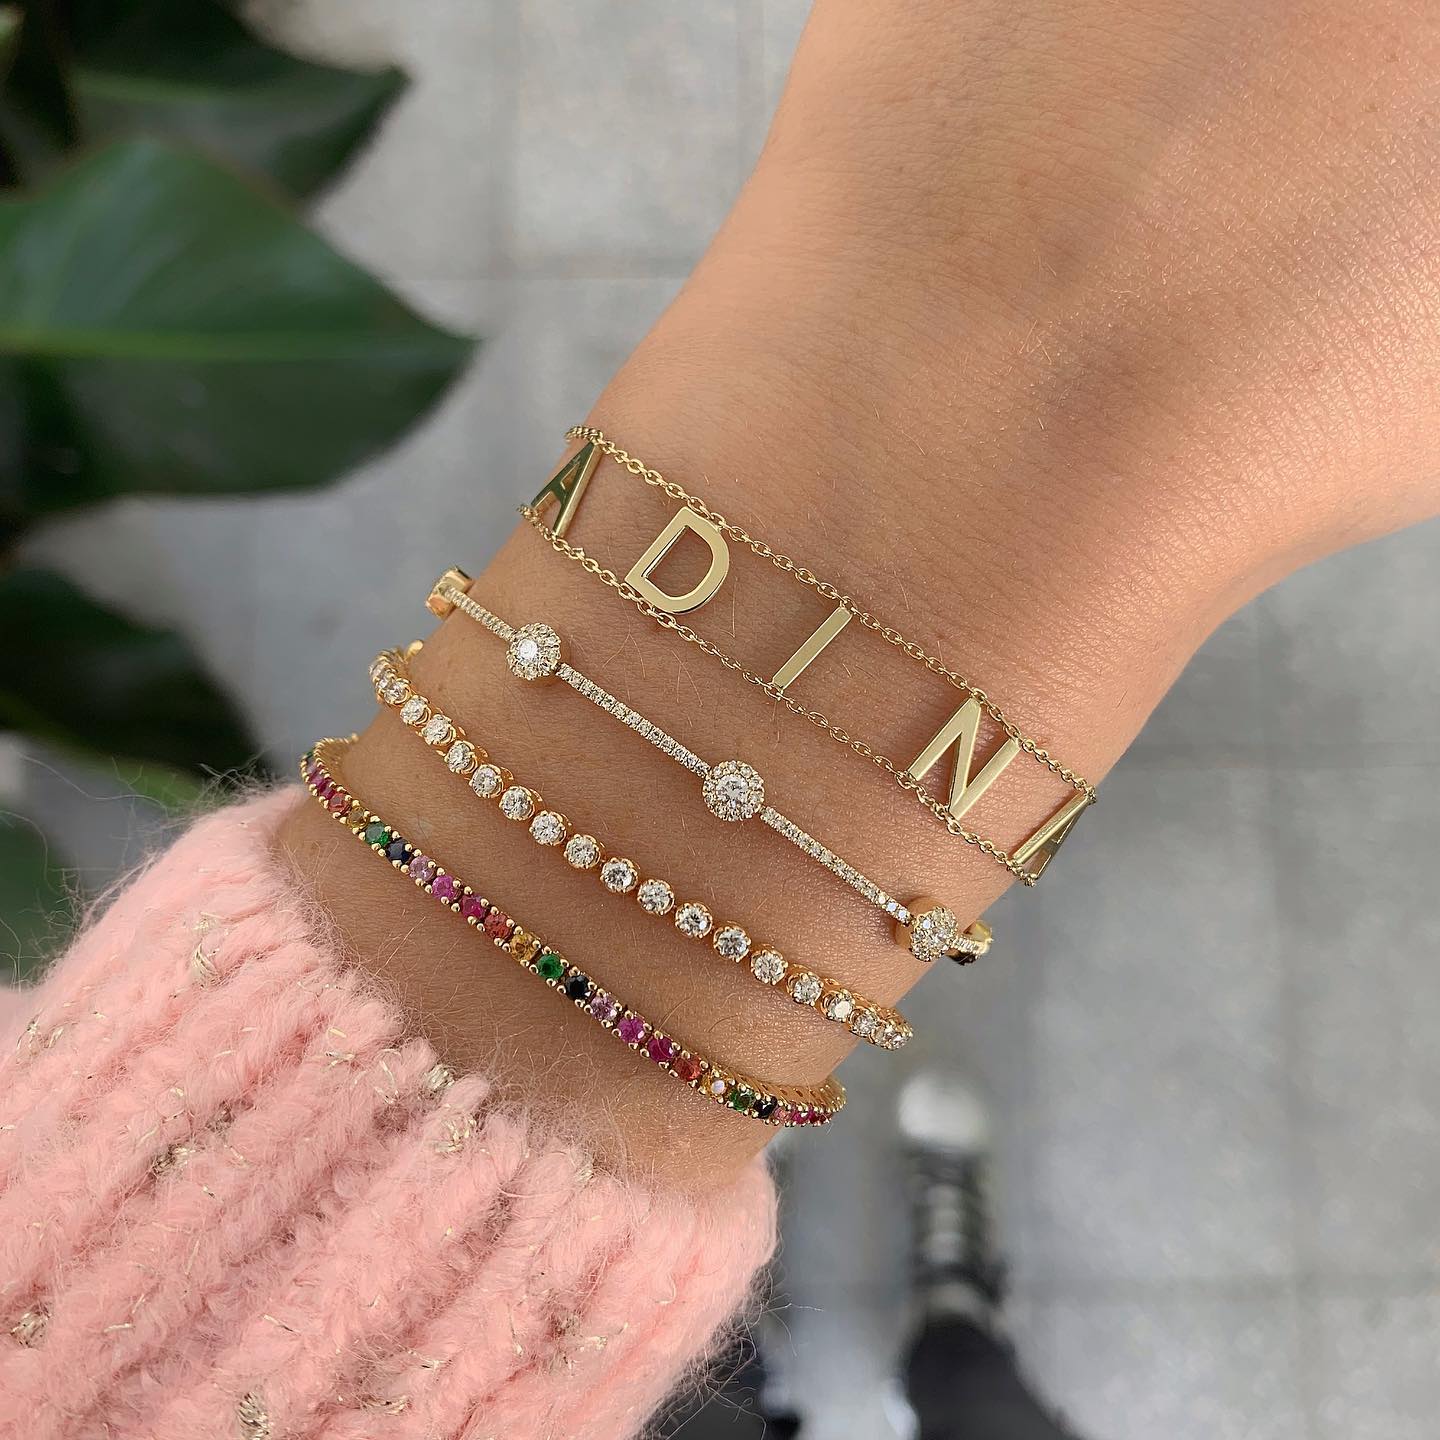 Custom Capital Letter Double Chain Link Bracelet With Personalized Initials  Duoying Egyptian Jewelry For DIY And Etsy J1301G From Aydqo, $33.93 |  DHgate.Com